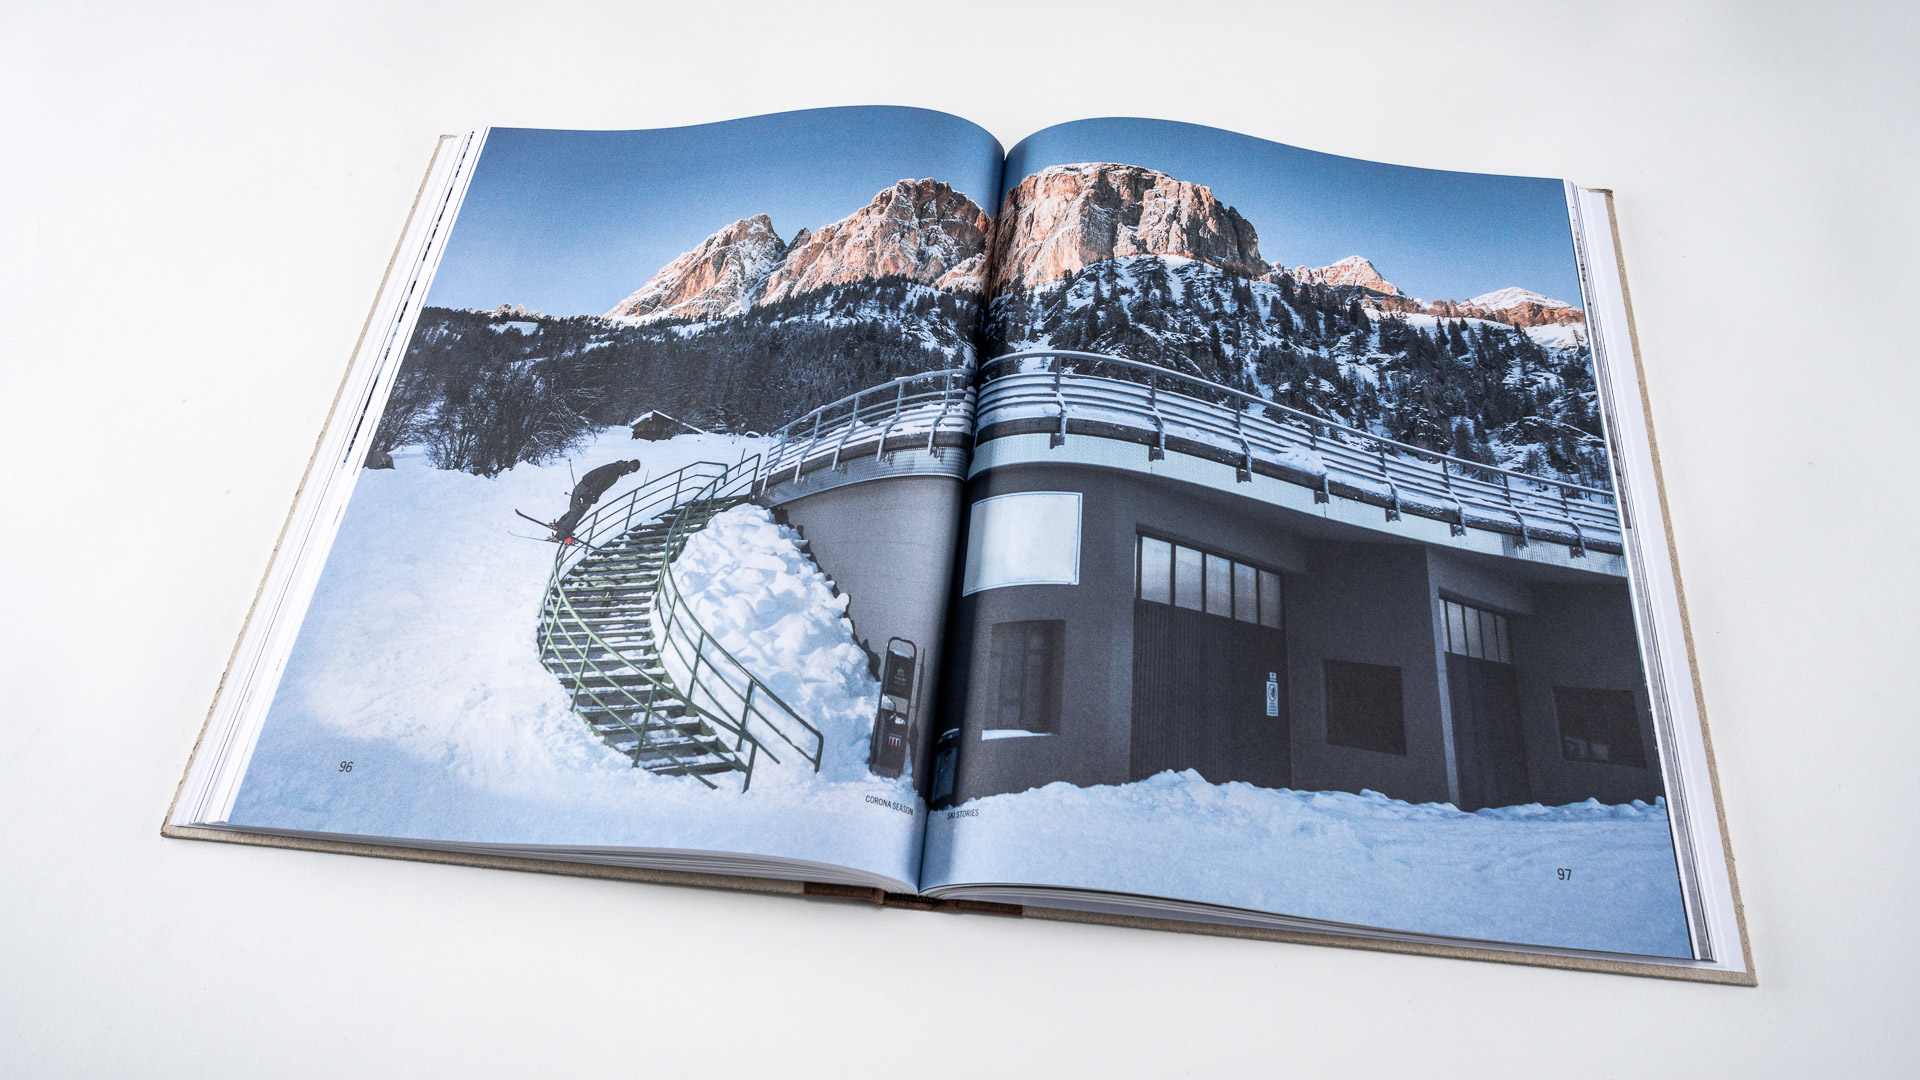 Moritz Happacher slides a rail in South Tyrol in the Corona Stories feature of Downdays Ski Stories Volume 3